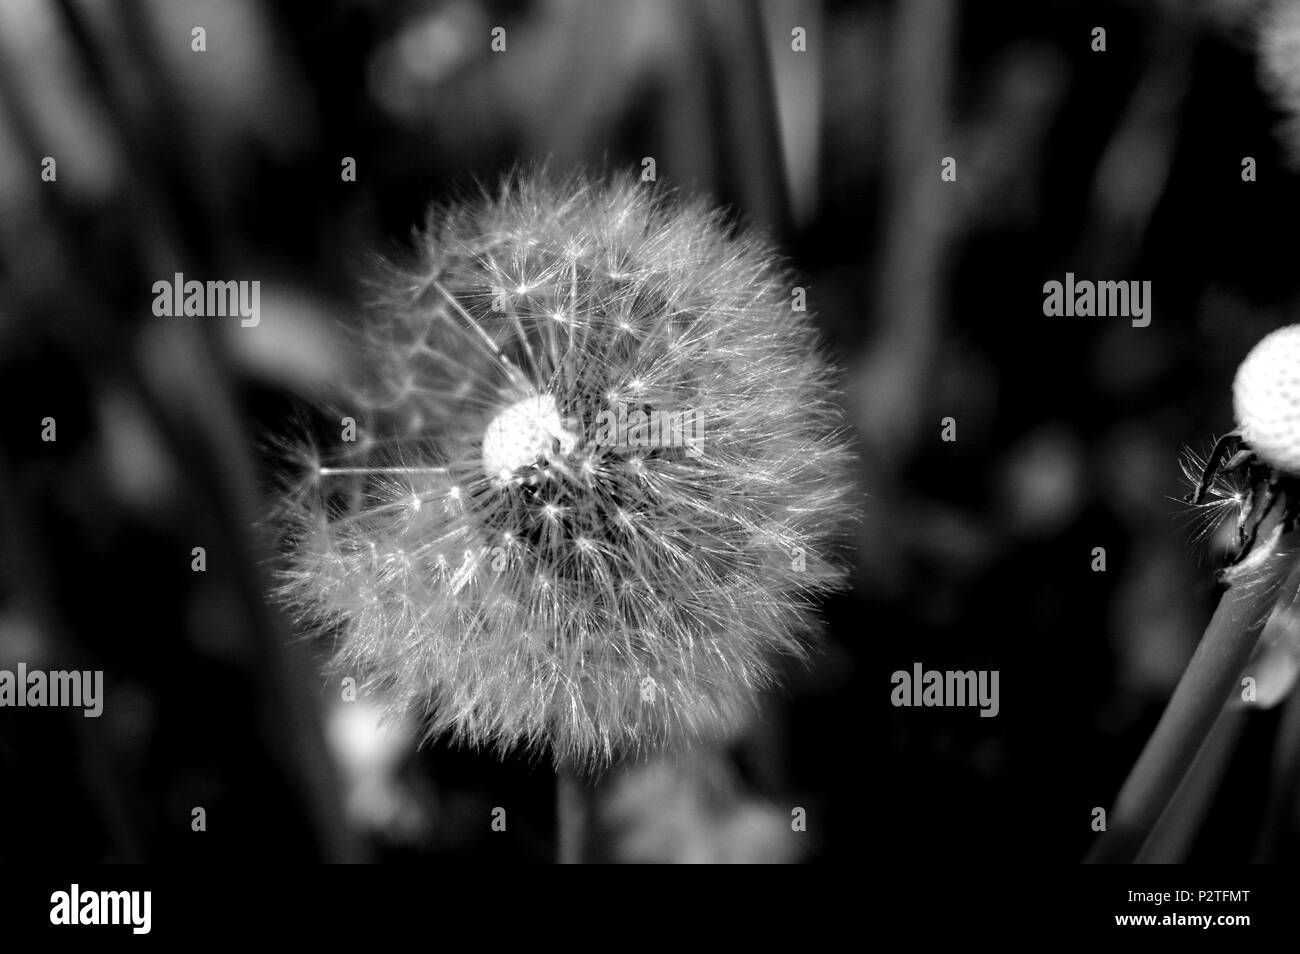 Seed feathers Black and White Stock Photos & Images - Alamy